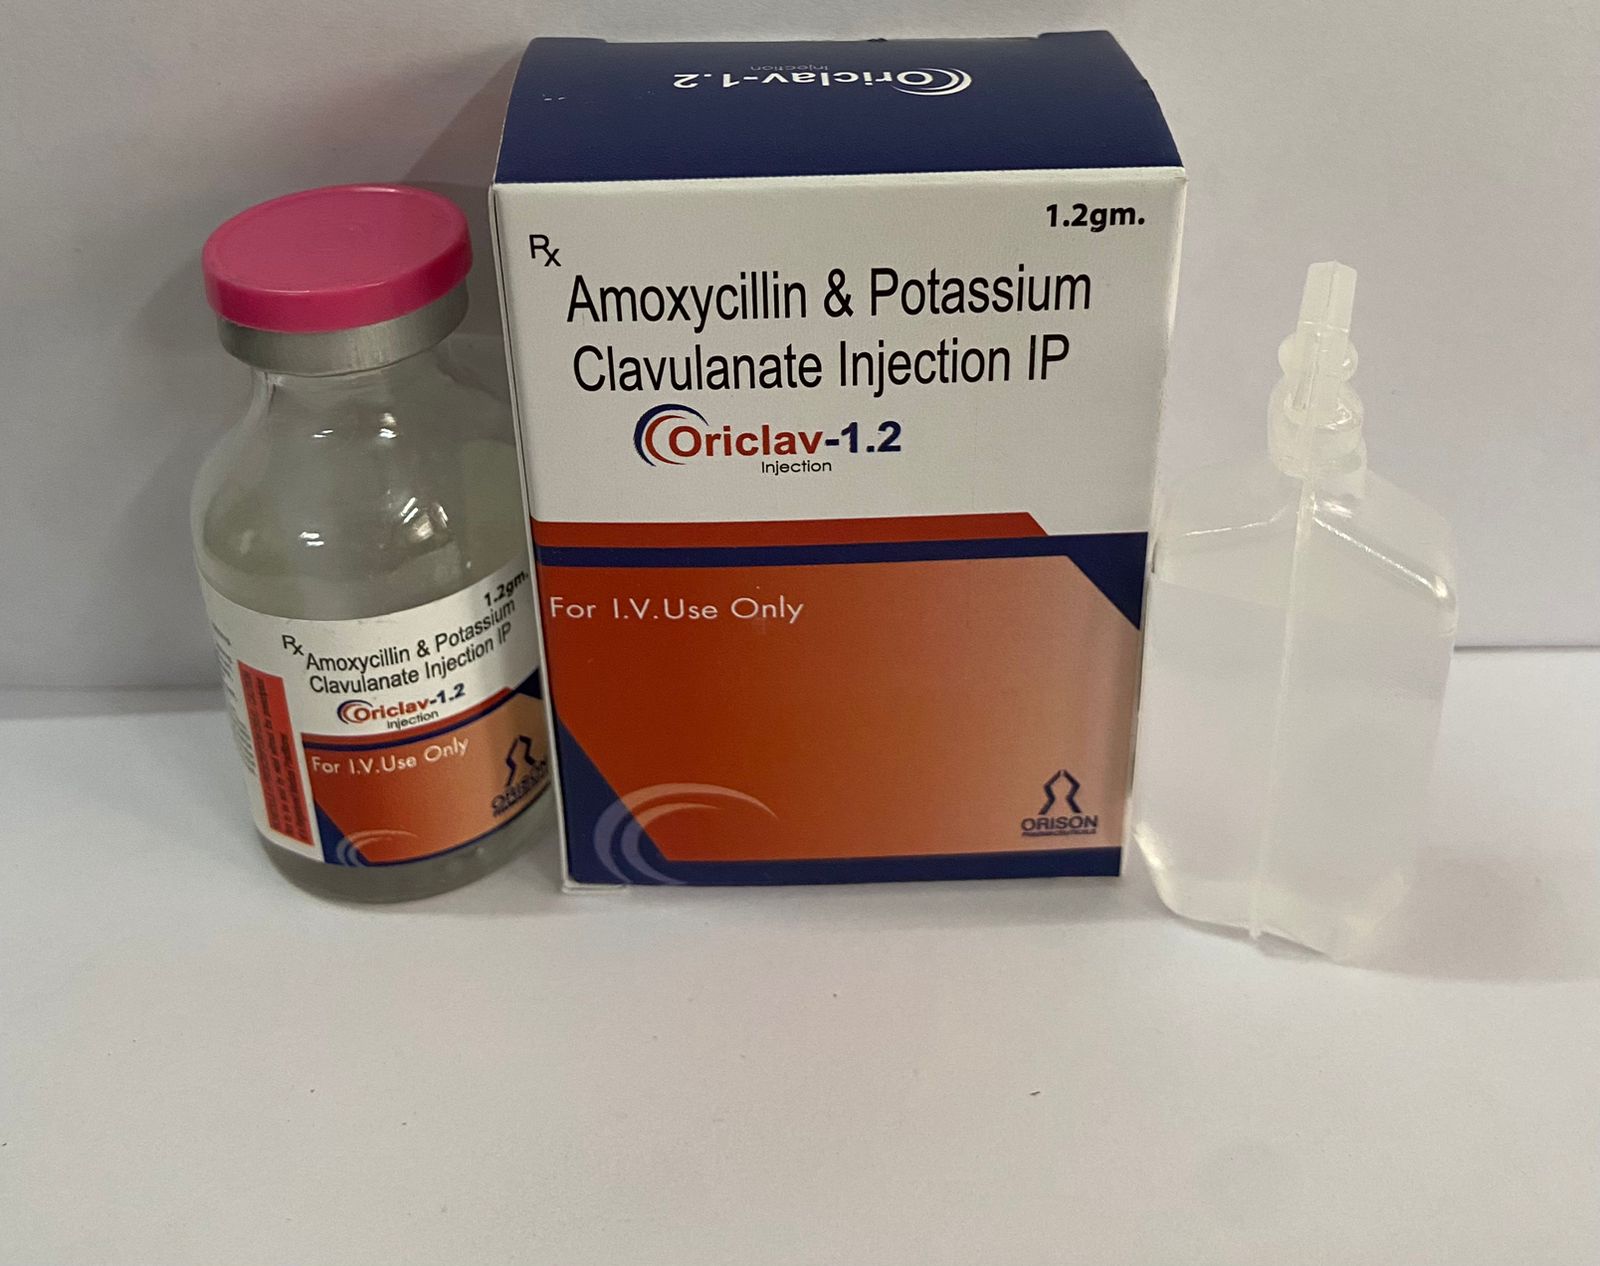 Product Name: Amoxycillin and Potassium Clavulanate Injection IP, Compositions of Amoxycillin and Potassium Clavulanate Injection IP are Amoxycillin & Potassium Clavulanate Injection IP - Orison Pharmaceuticals